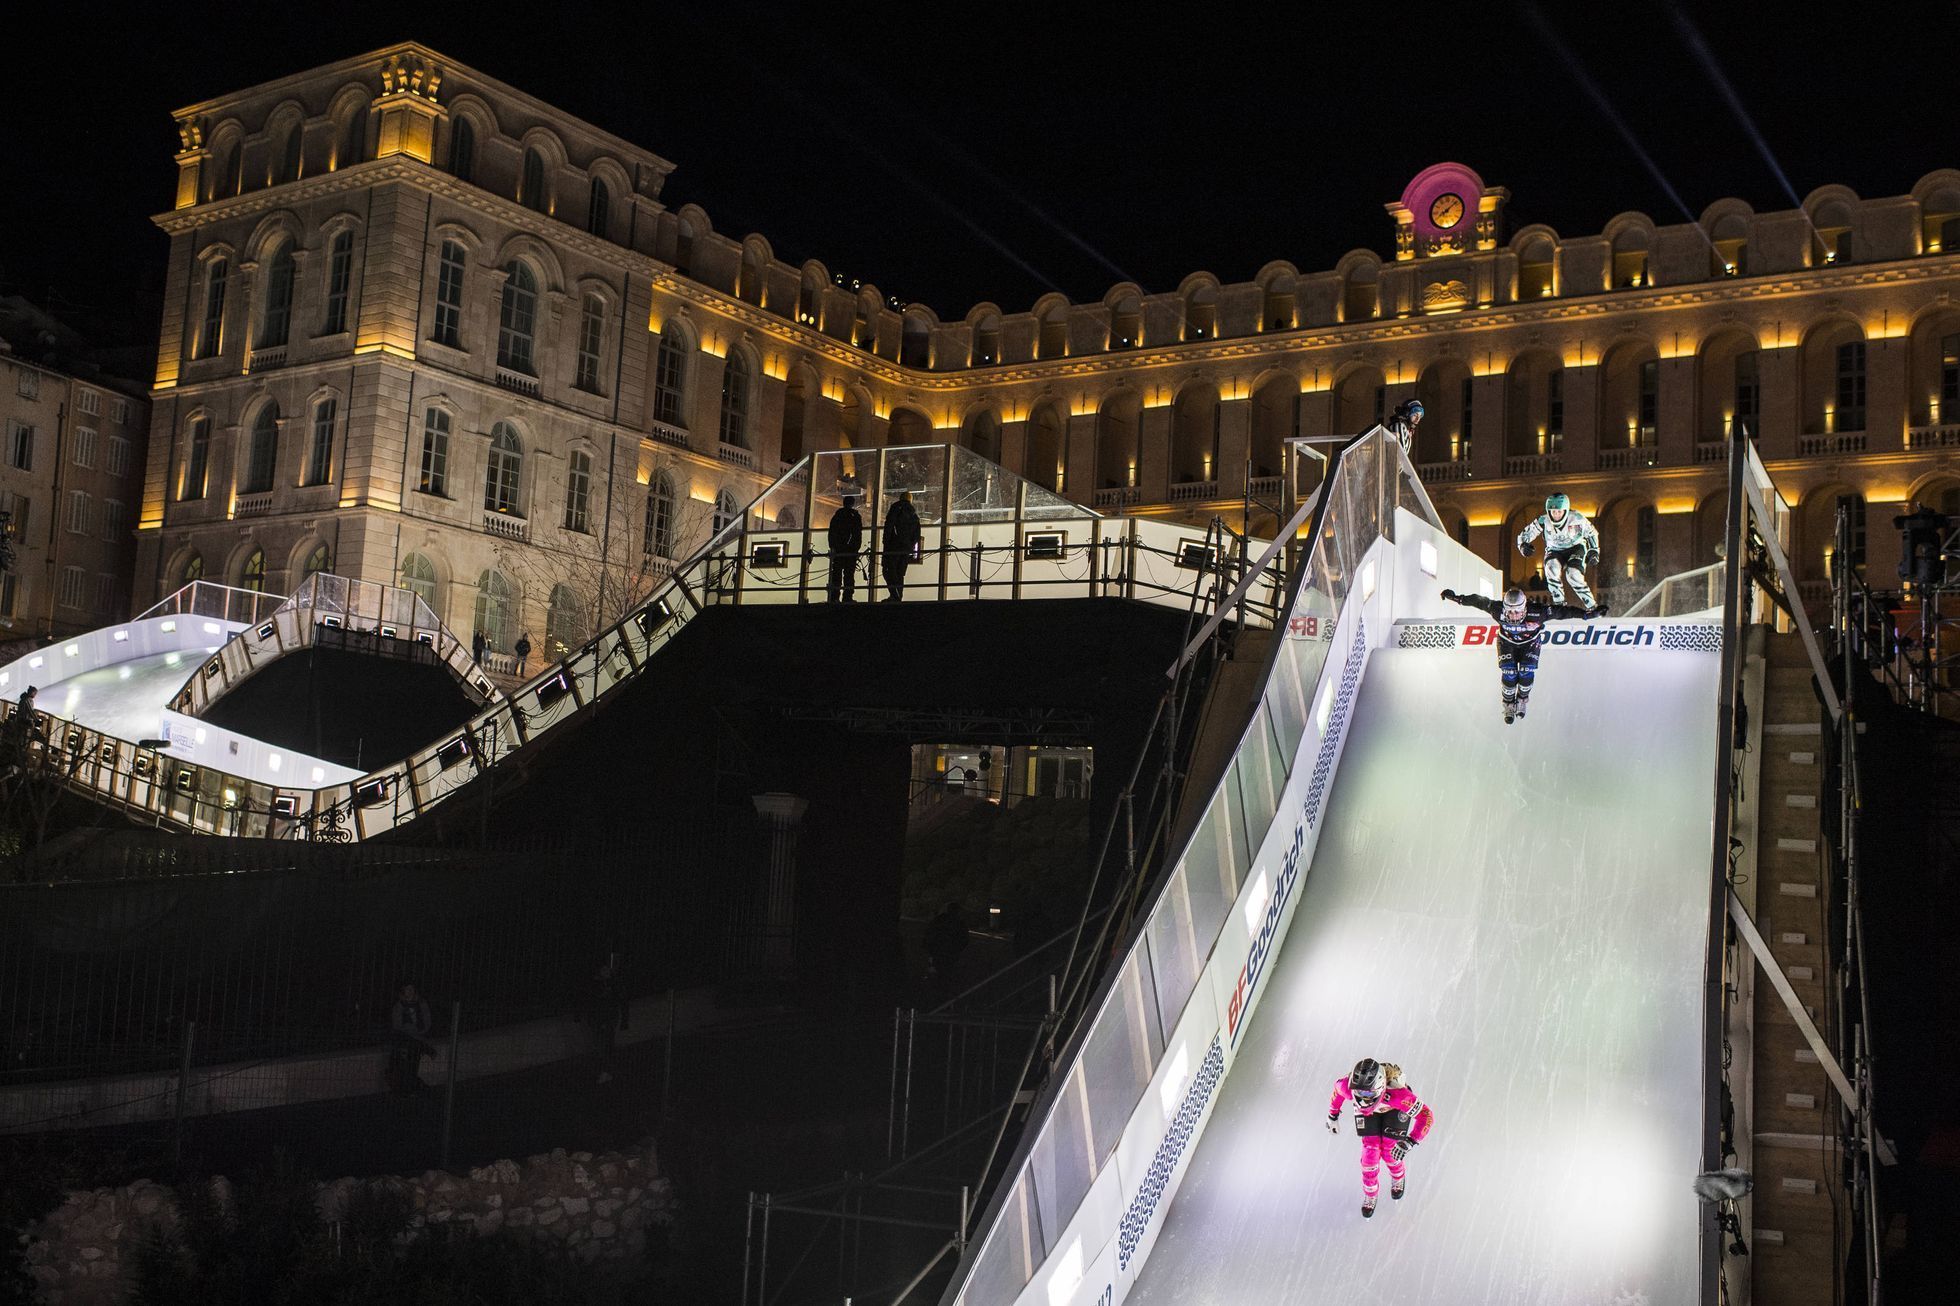 Red Bull Crashed Ice Marseille